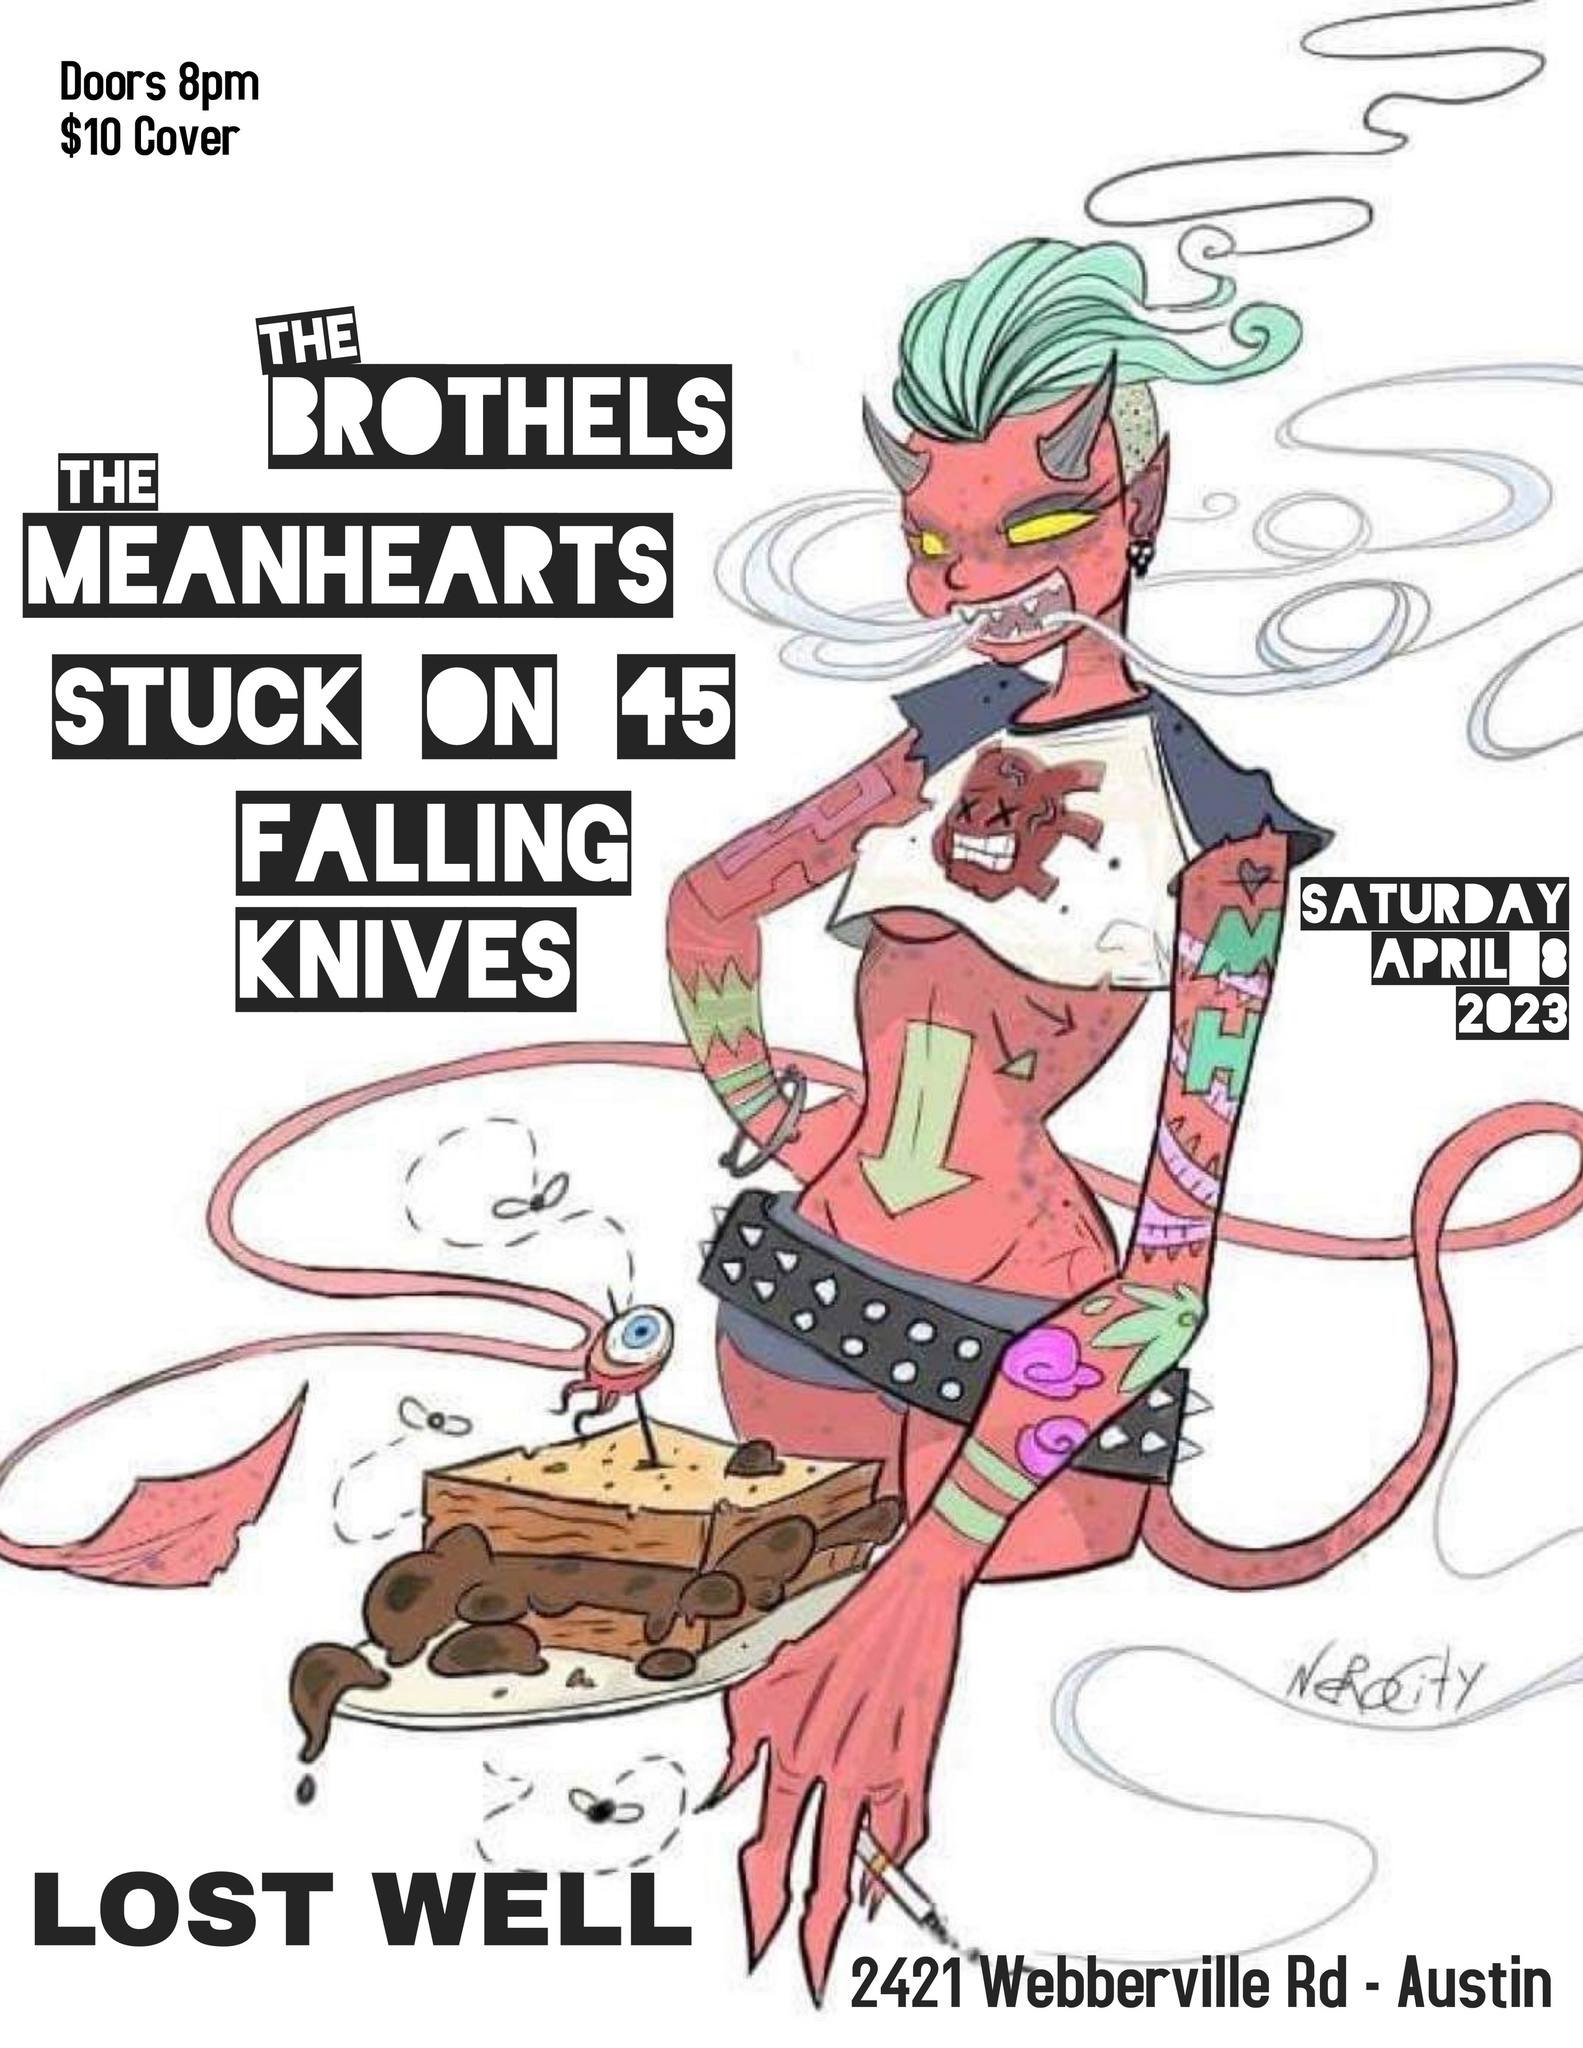 The Brothels, The Meanhearts, Stuck on 45, Falling Knives